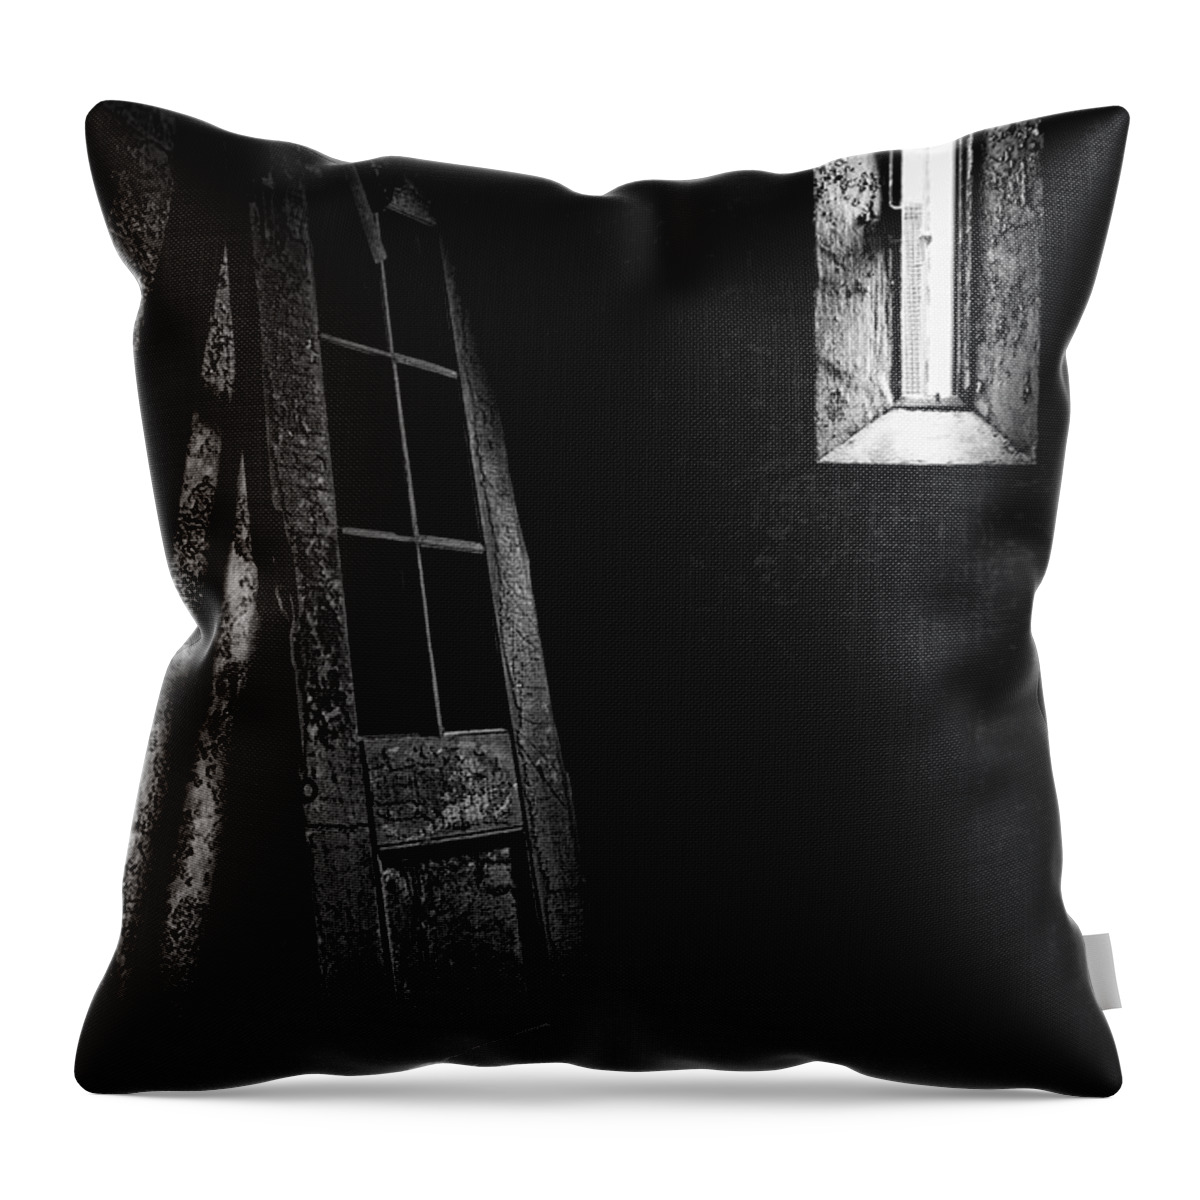 Philadelphia Throw Pillow featuring the photograph Unhinged by Andrew Paranavitana